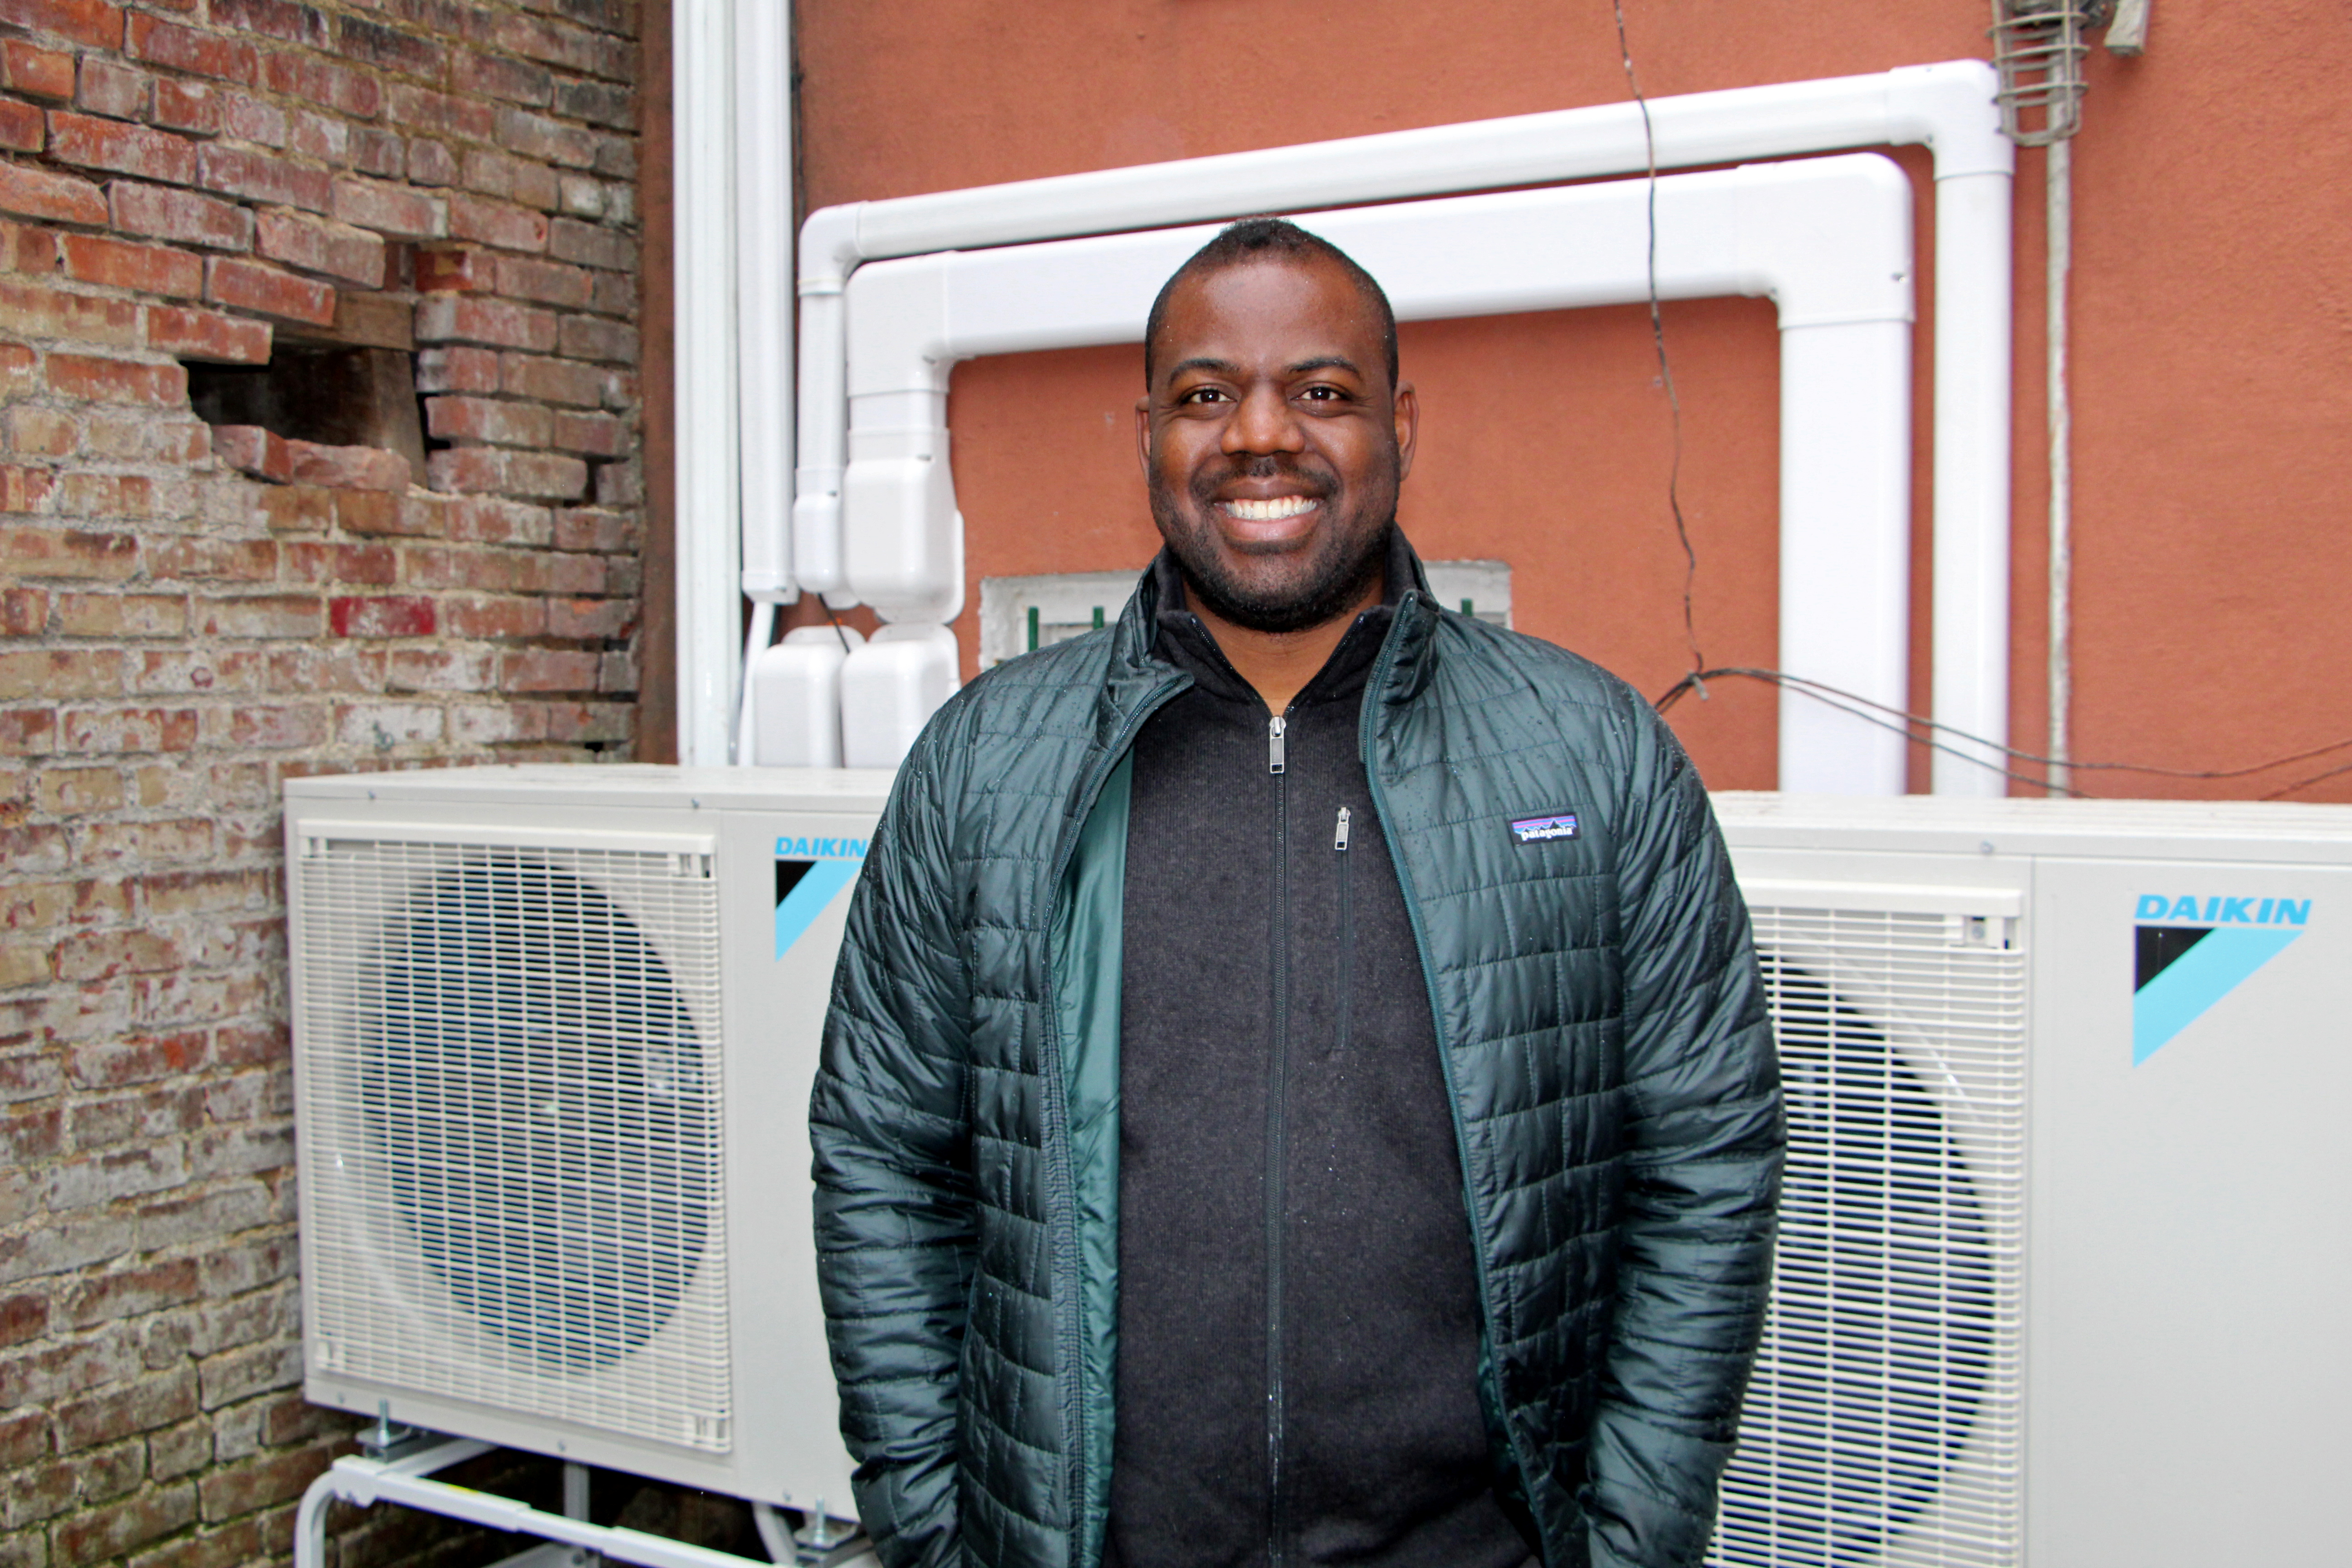 BlocPower CEO and founder Baird poses for a portrait in Brooklyn